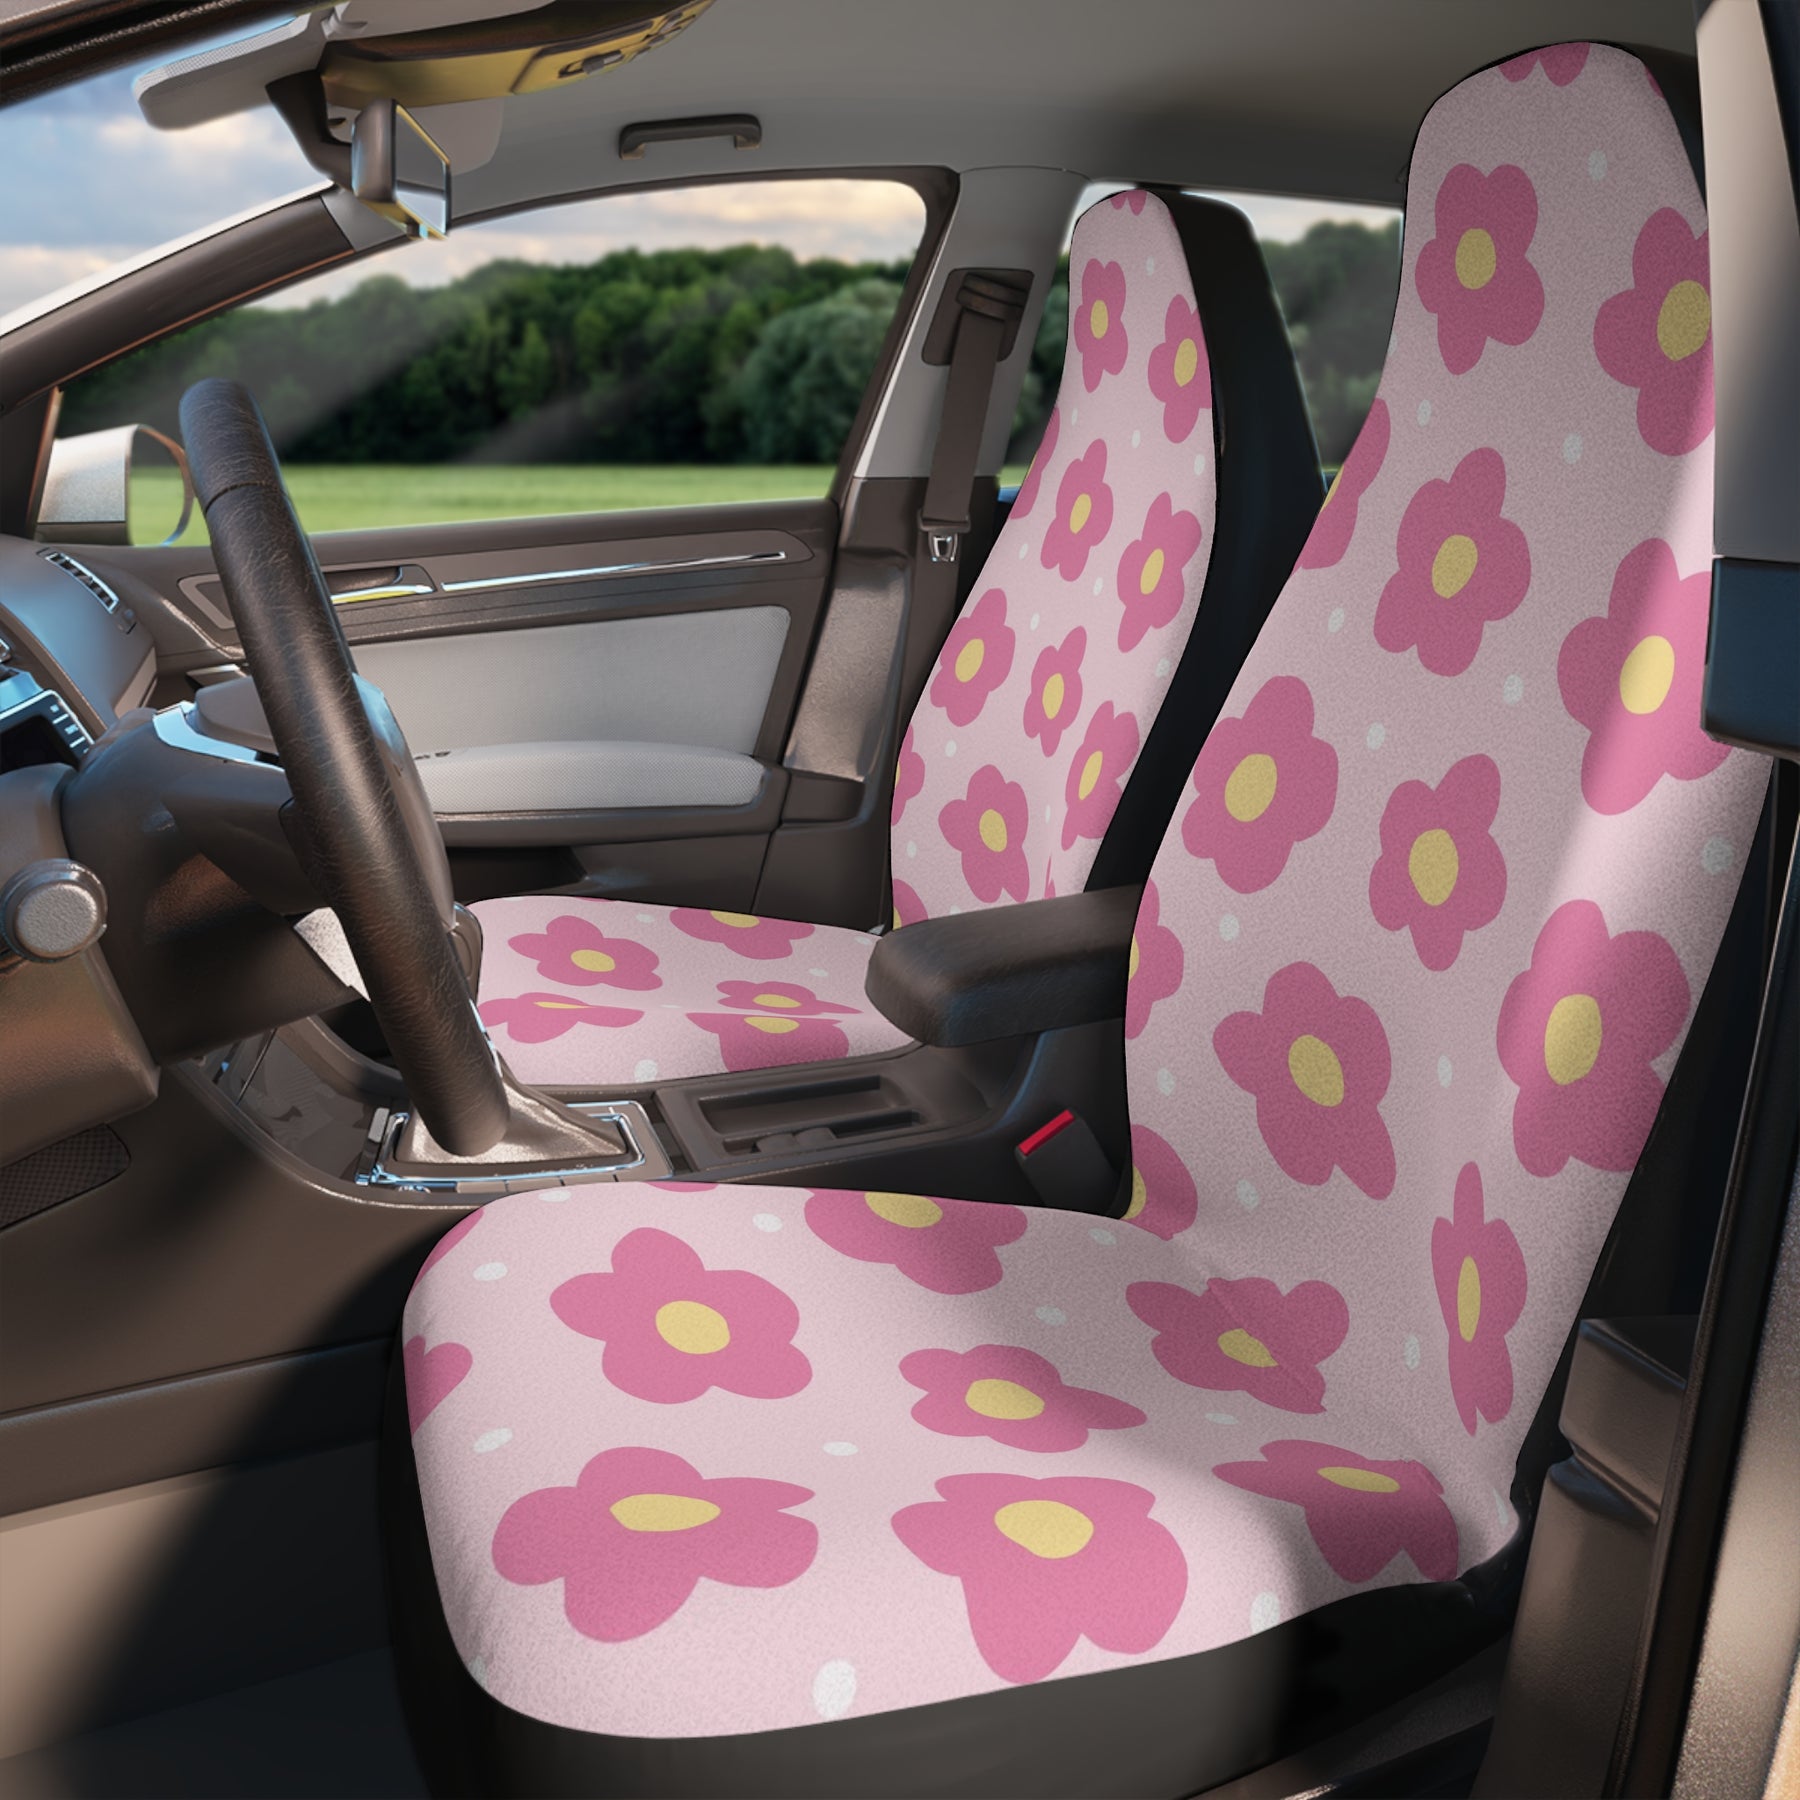 Pink boho Car Seat Covers Set,Aesthetic Flower Car Seat Covers,Cute Y2K Car Accessories,Girly Car accessories,cute interior car decor